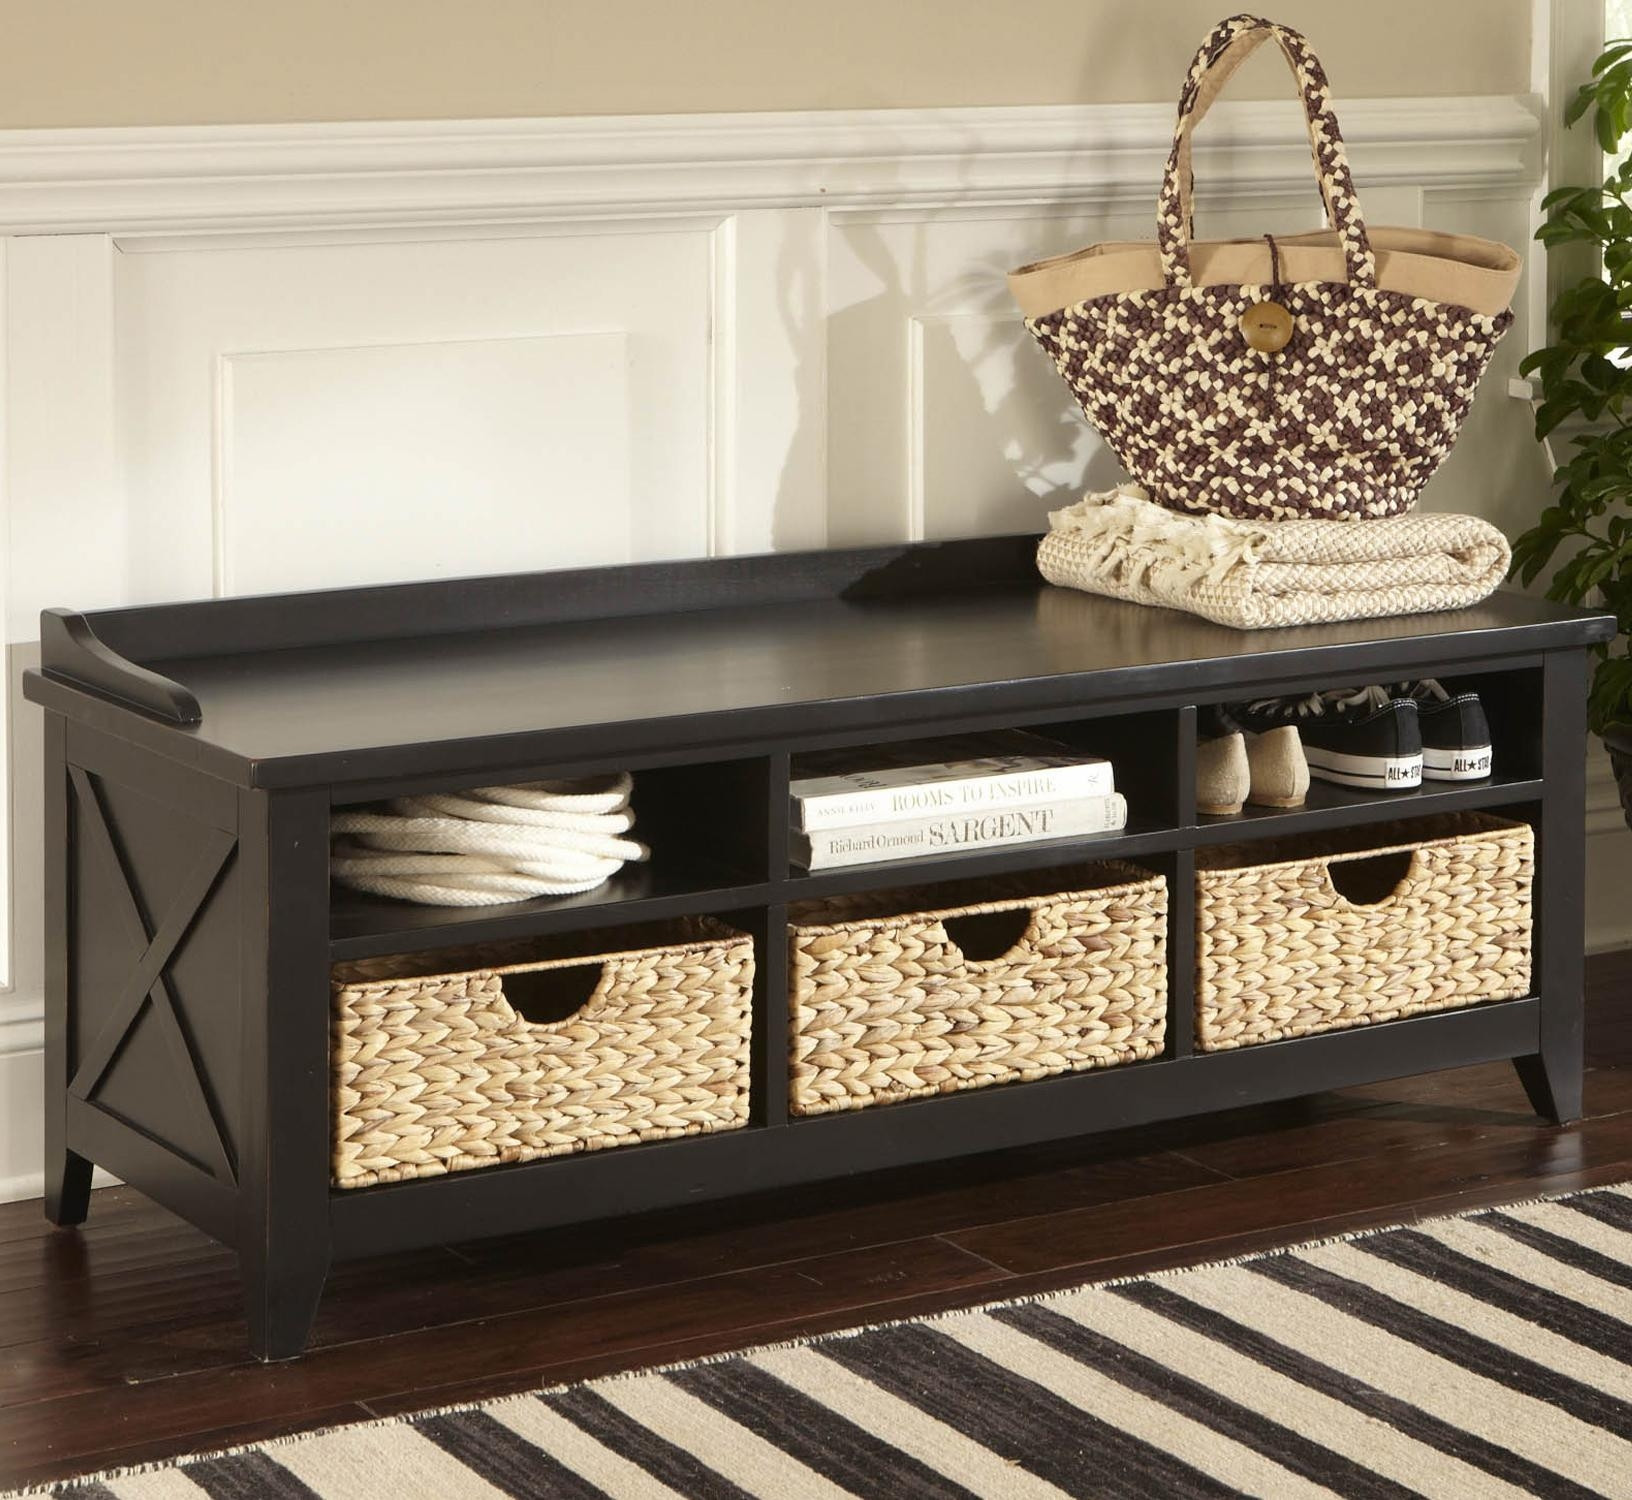 Front Entryway Storage Bench
 Entryway Storage Bench With Back